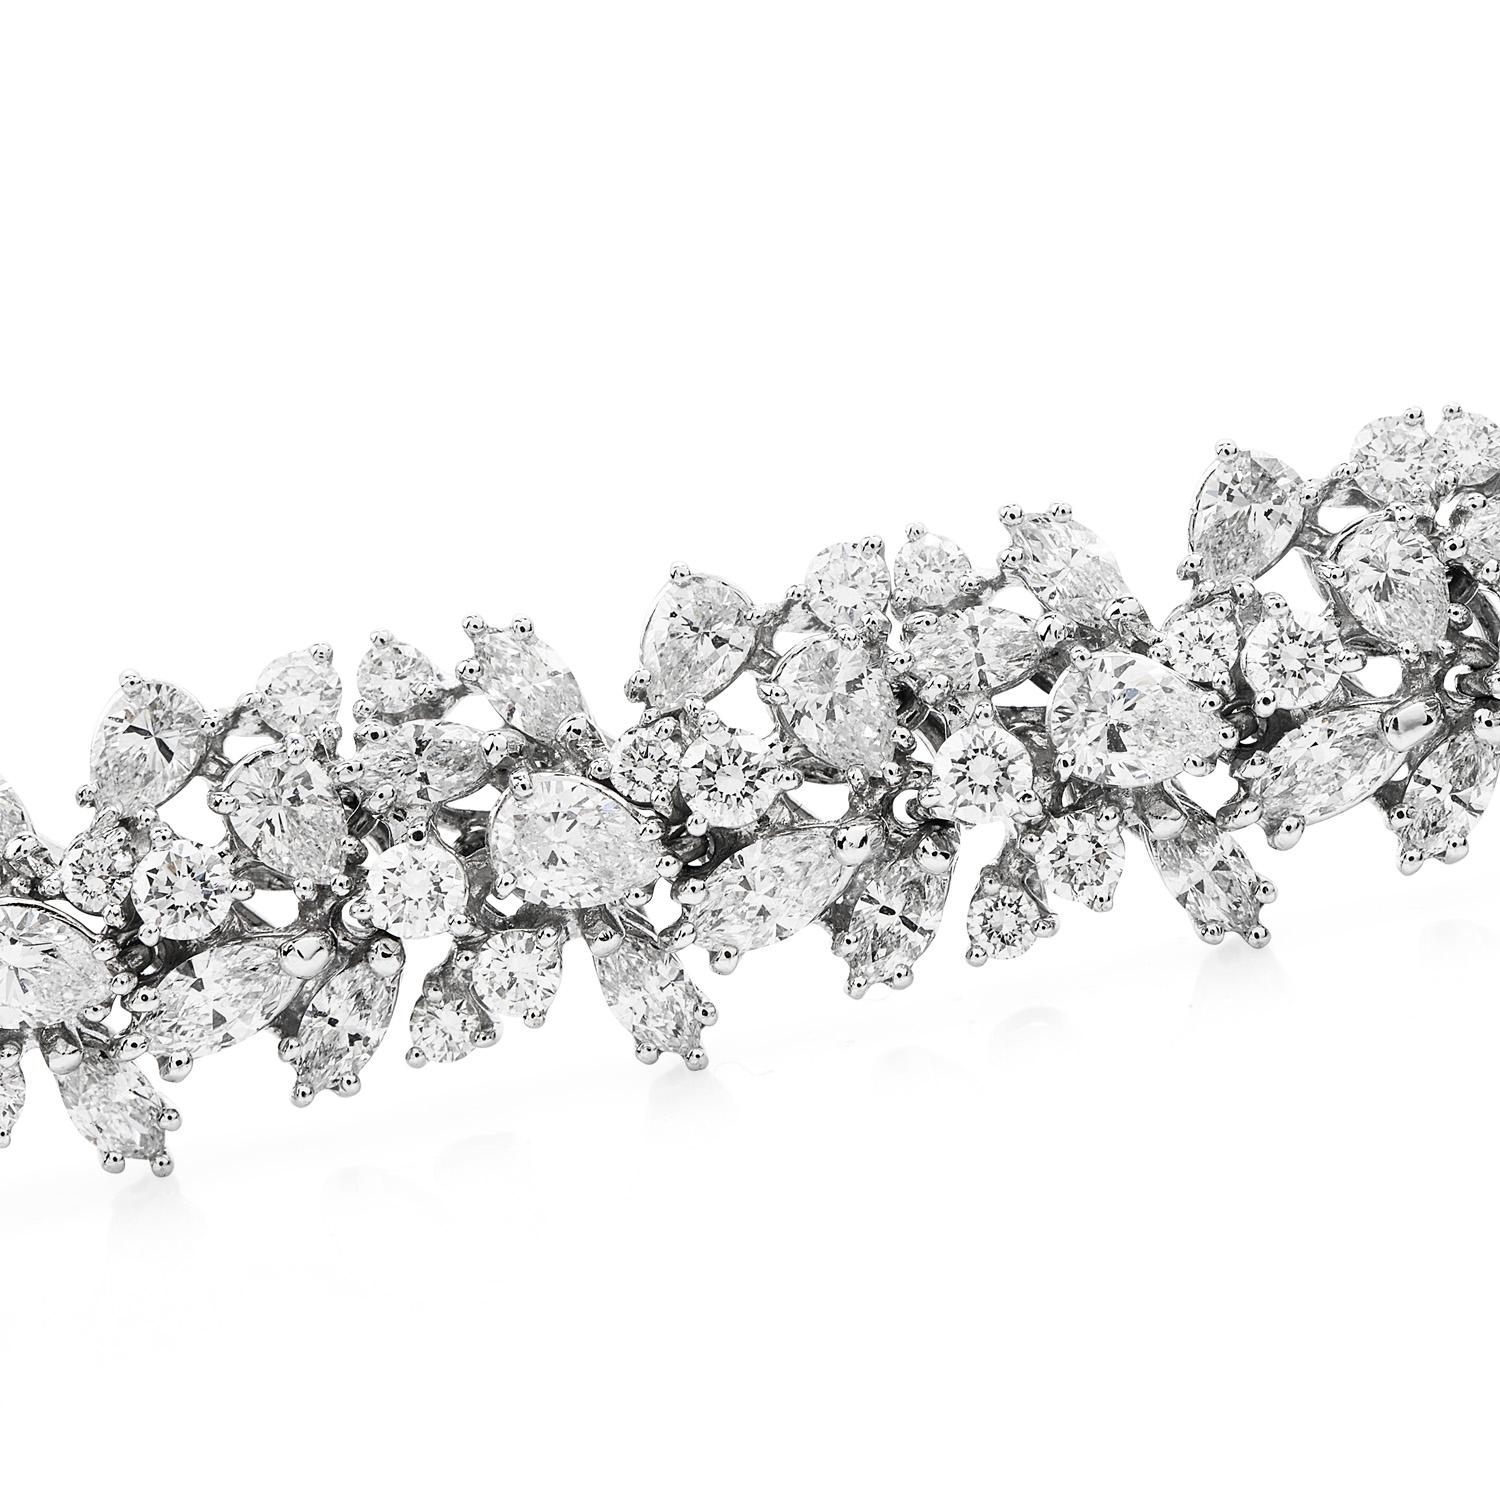 Estate Diamond 18K Gold Elegant Cluster Floral Links Bracelet

Sparkle and dazzle with this diamond 18K Gold Links Bracelet,

inspired by a floral motif with a total weight of

approximately 39.0 grams.

Expertly crafted in solid heavy 18K white